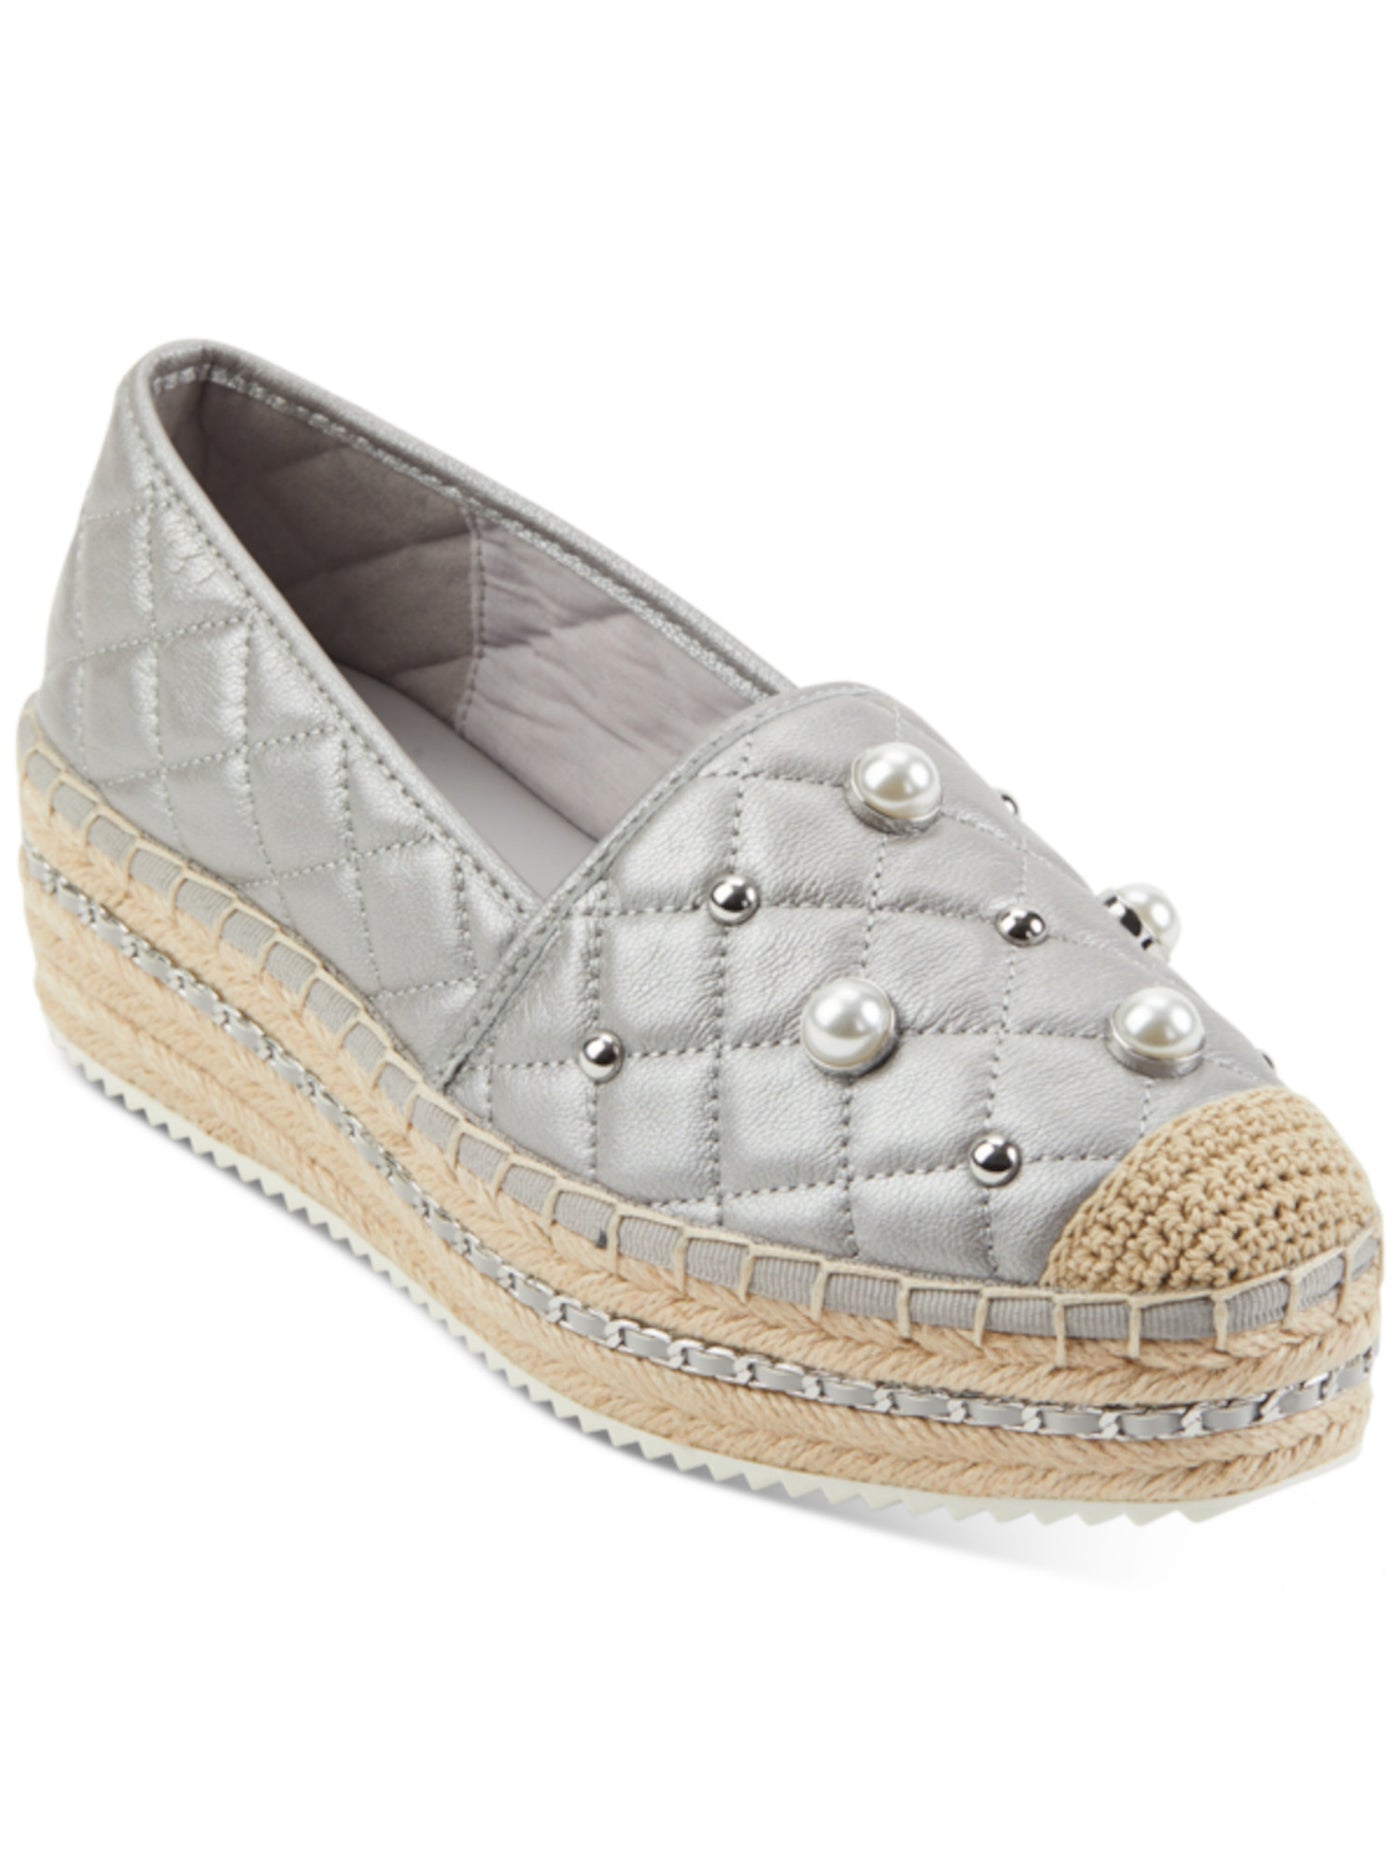 KARL LAGERFELD Womens Gray 1-1/2" Platform Quilted Embellished Diya Round Toe Wedge Slip On Leather Espadrille Shoes 10 M